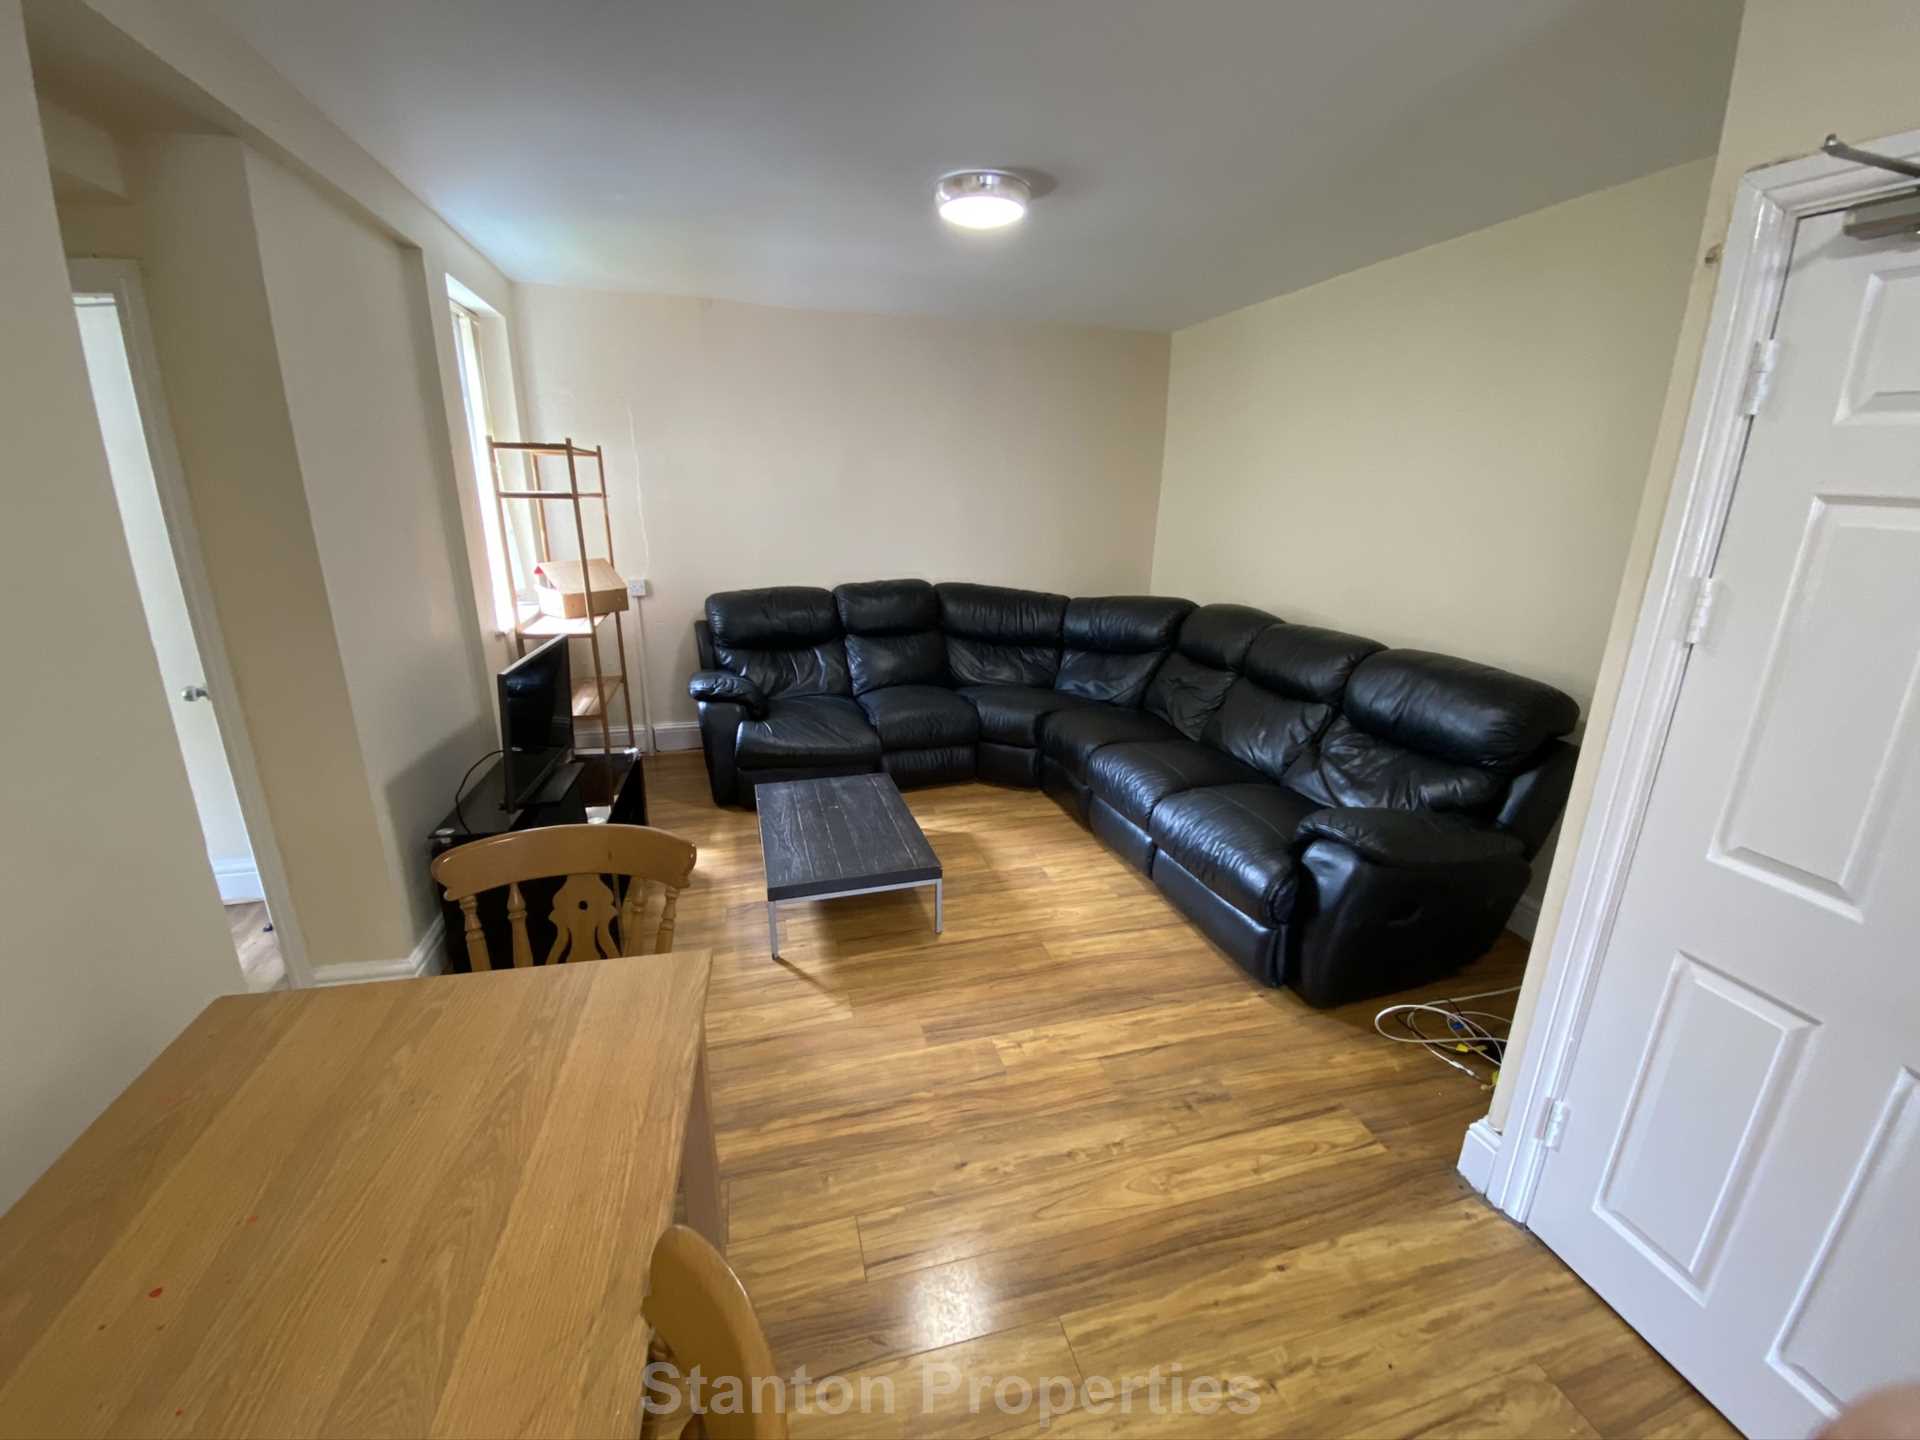 £120 pppw, Weld Road, Withington, Image 1